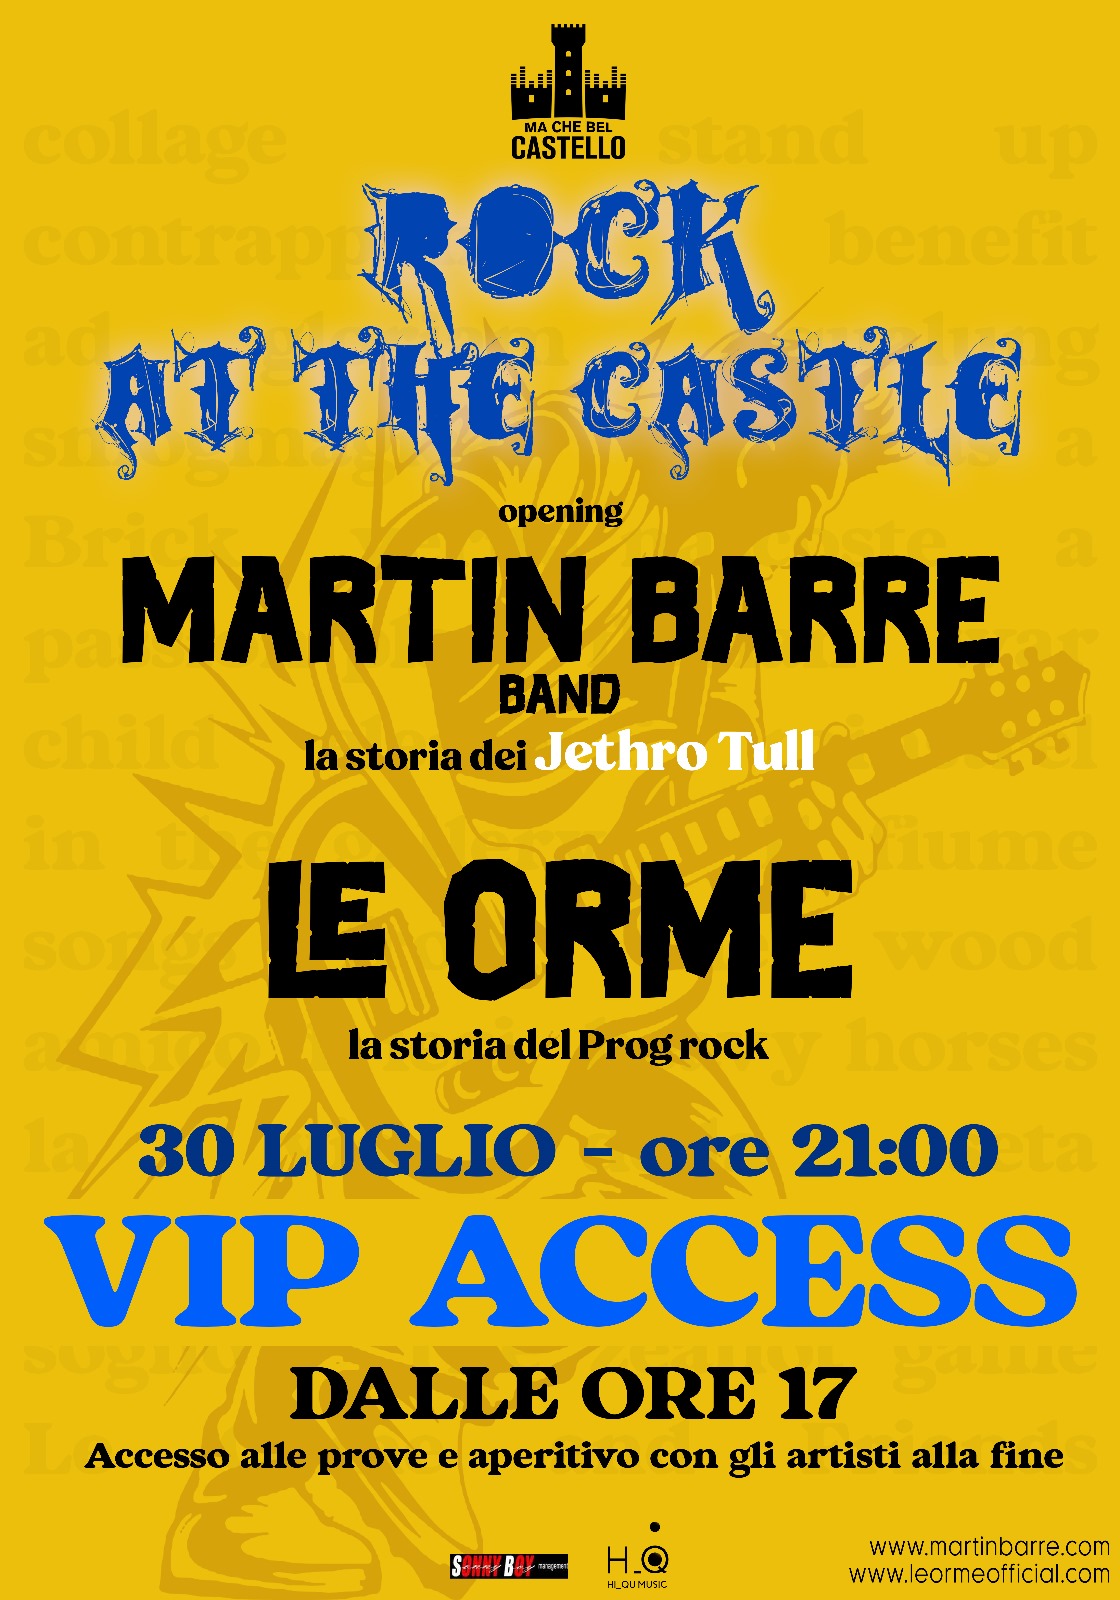 ℝ𝕆ℂ𝕂 𝔸𝕋 𝕋ℍ𝔼 ℂ𝔸𝕊𝕋𝕃𝔼 – VIP ACCES PASS + CD + Maglietta – Limieted Edition